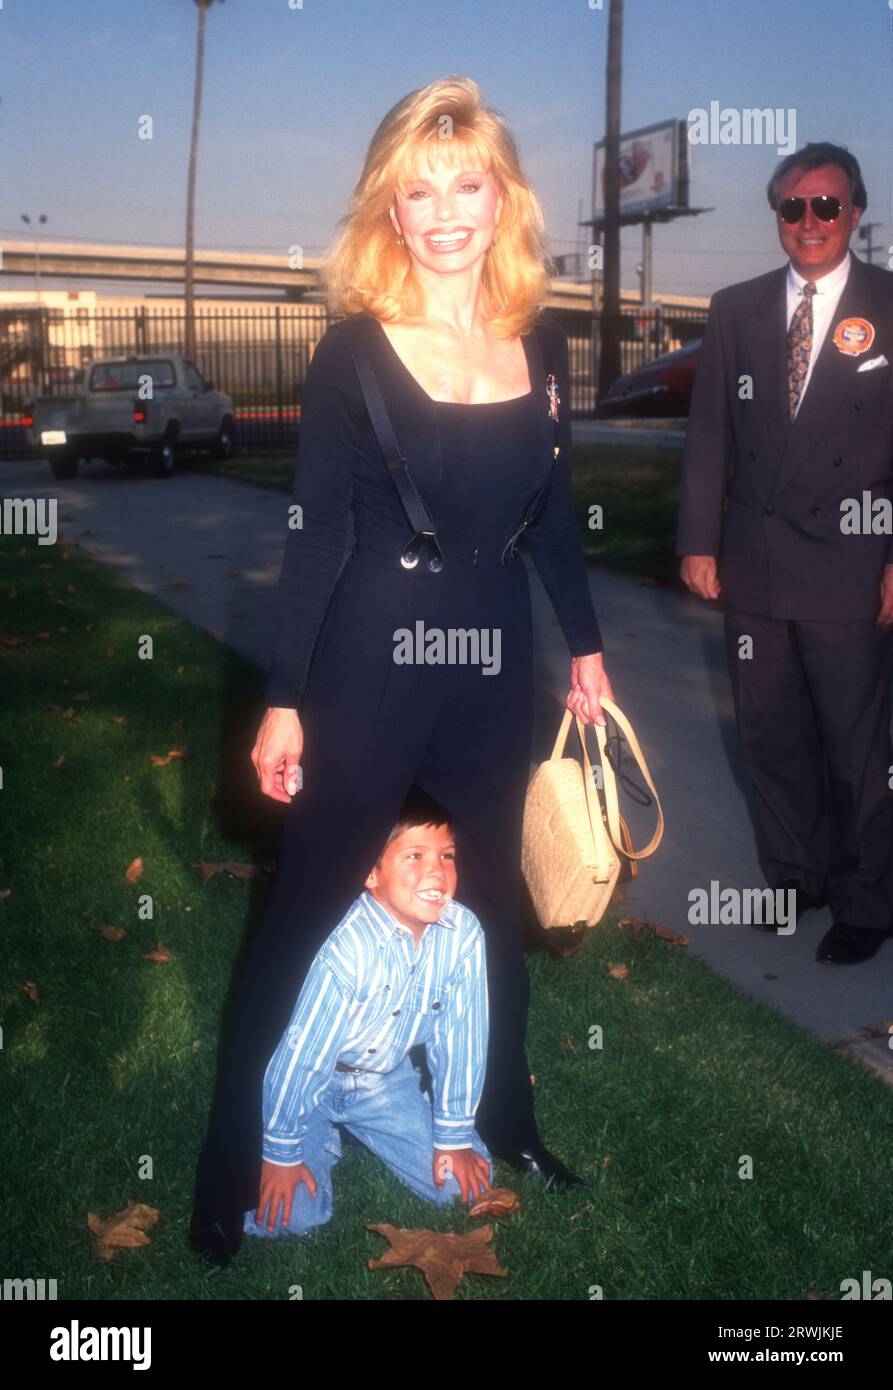 Los Angeles, California, USA 25th July 1996 Actress Loni Anderson and son Quinton Reynolds attend ÒThe Greatest Show On EarthÓ Ringling Brothers and Barnum & Bailey 126th Edition to Benefit the Variety Club ChildrenÕs Charity at the Los Angeles Sports Arena on July 25, 1996 in Los Angeles, California, USA. Photo by Barry King/Alamy Stock Photo Stock Photo